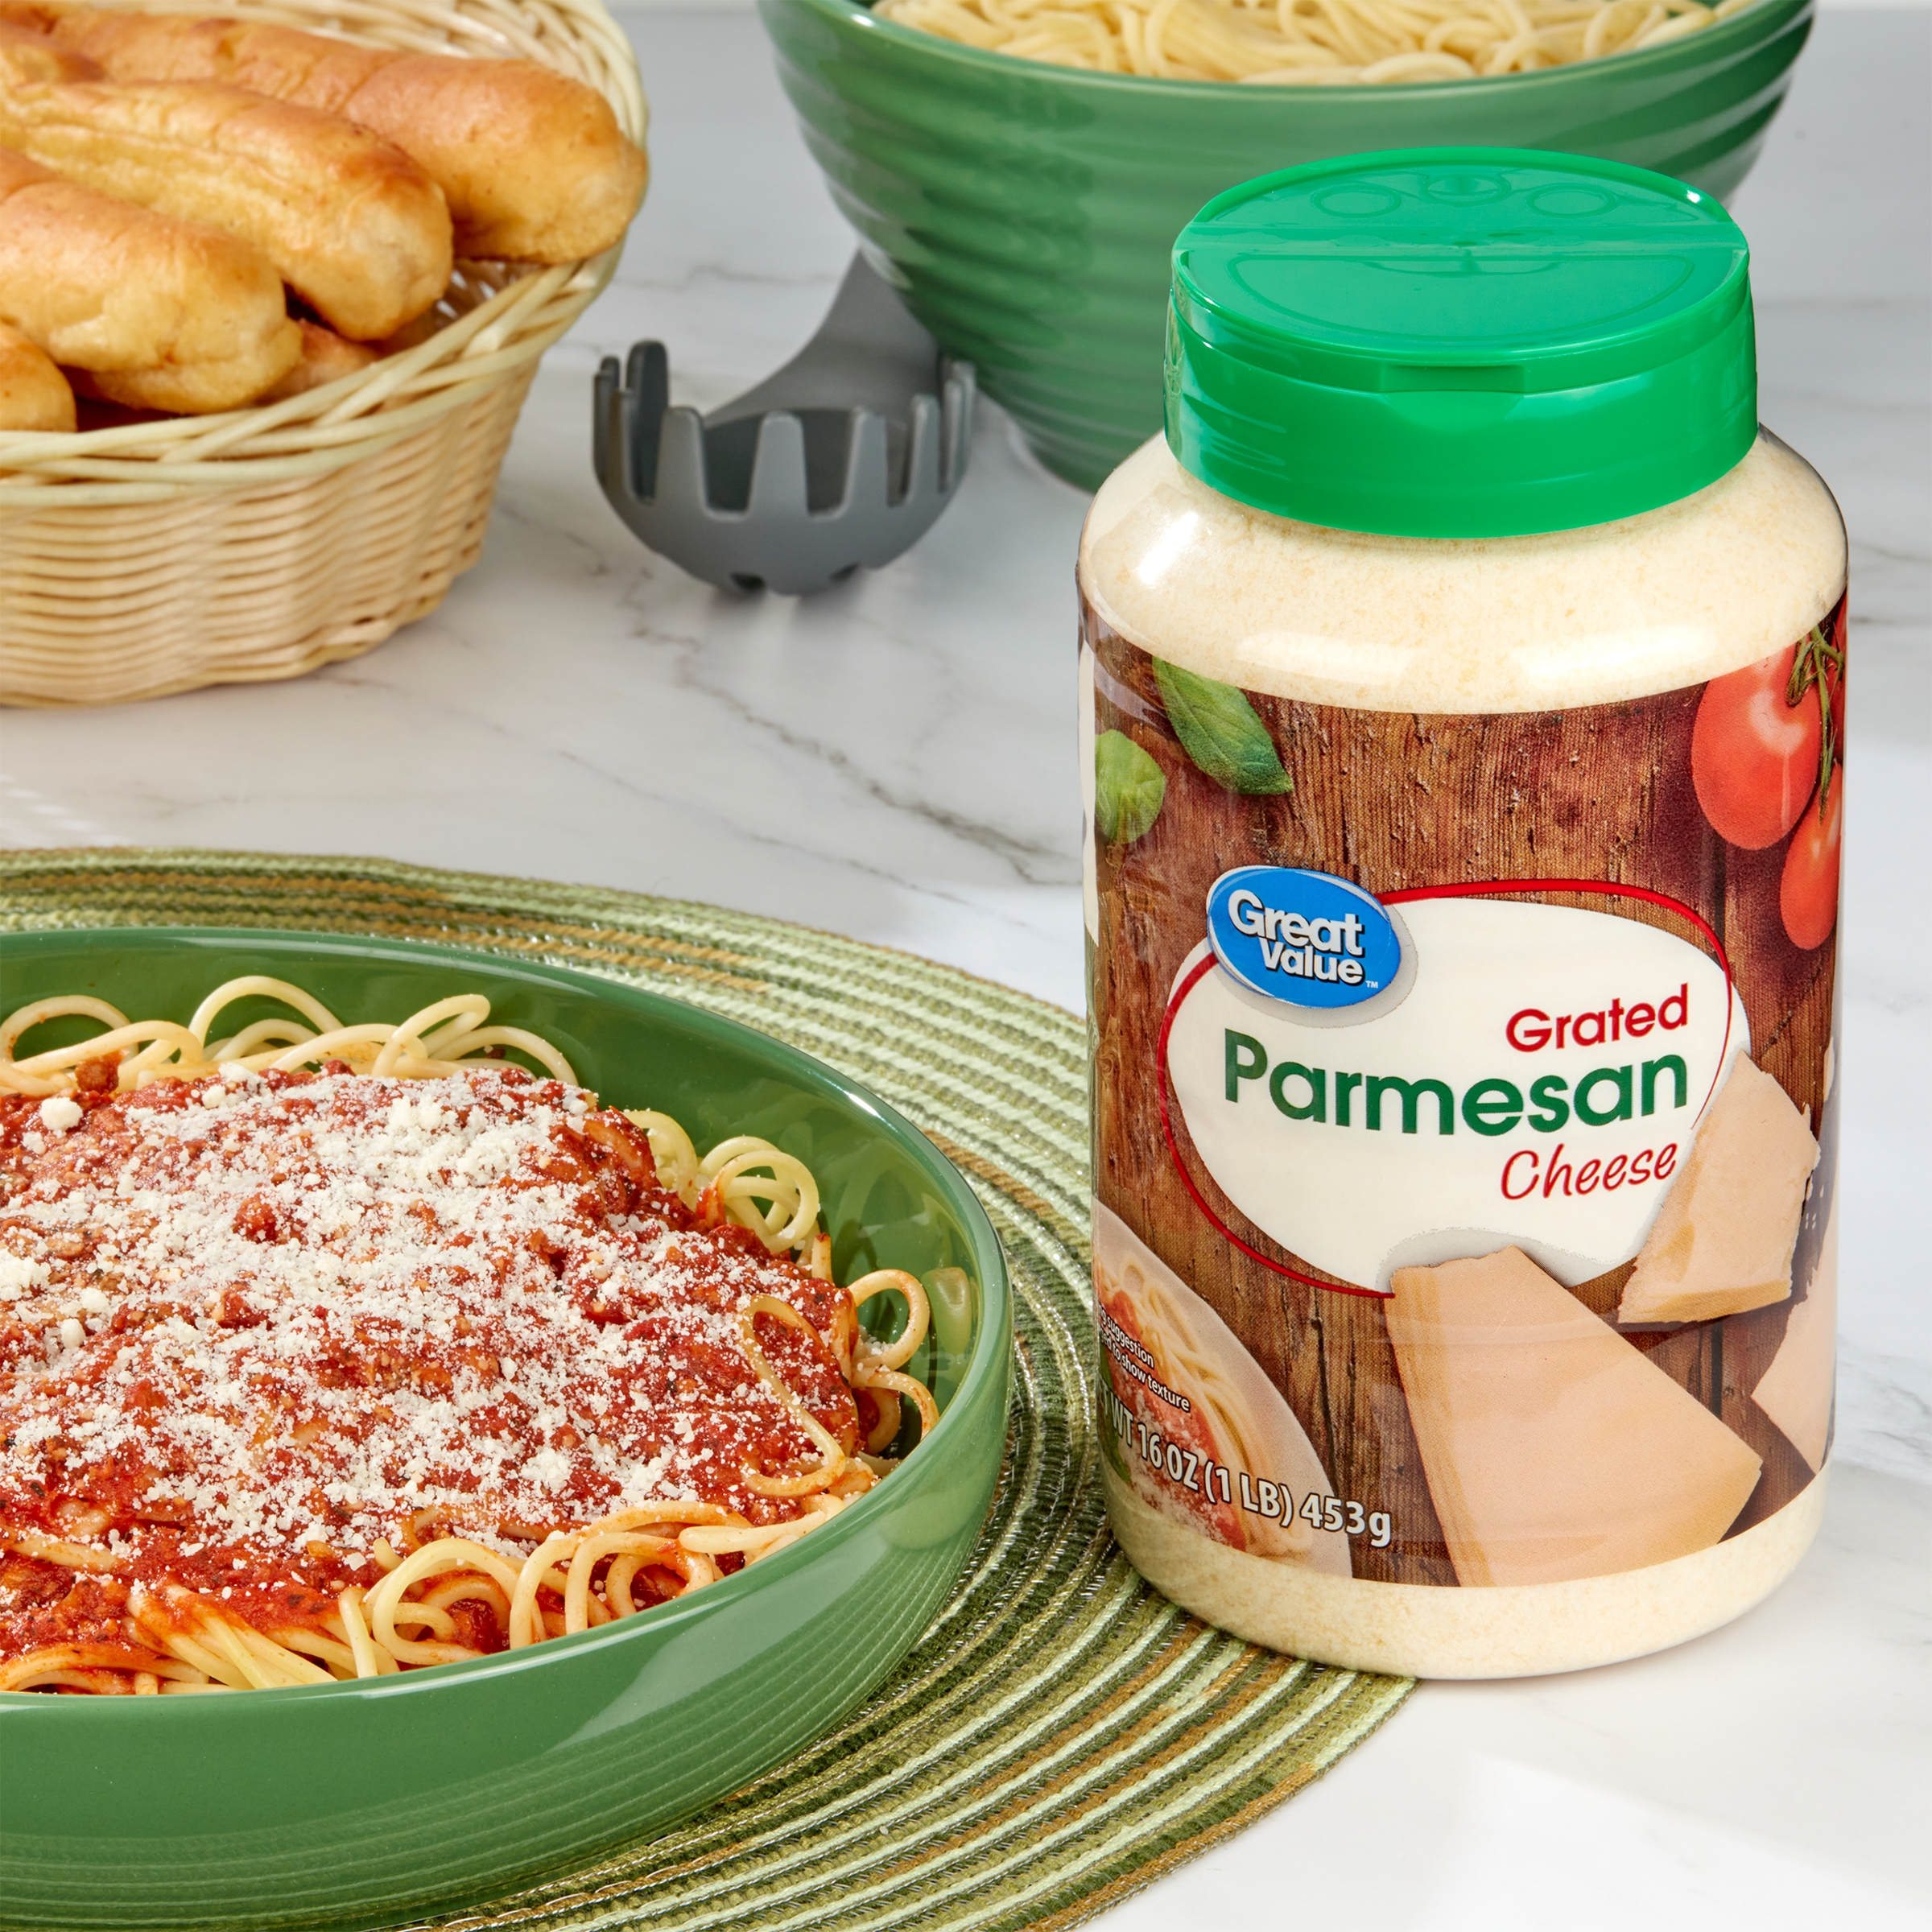 Great Value Grated Parmesan Cheese, 16 oz Bottle - image 2 of 7